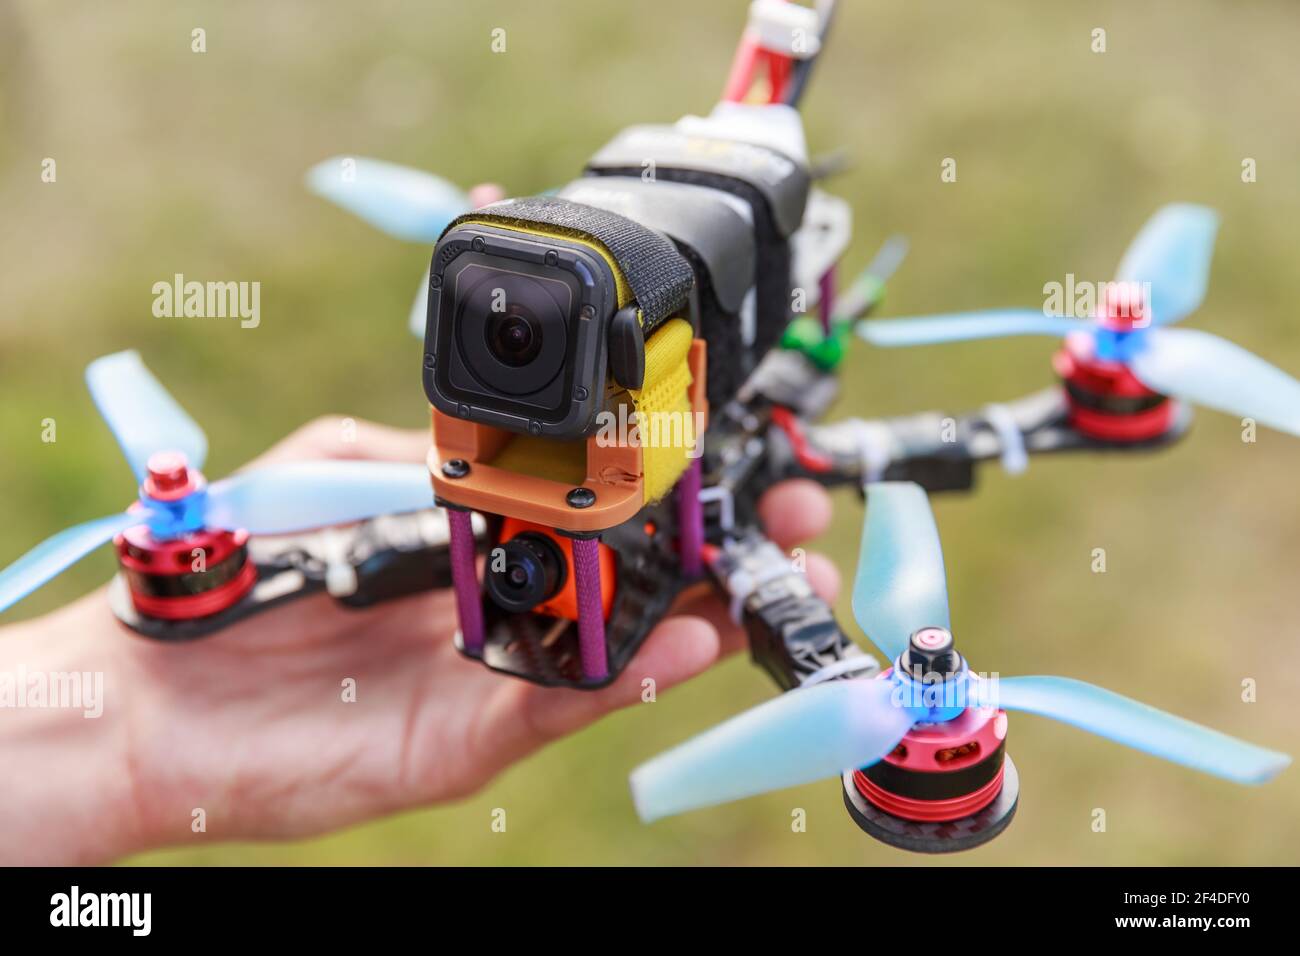 A fpv high-speed racing drone copter lying on a hand Photo -